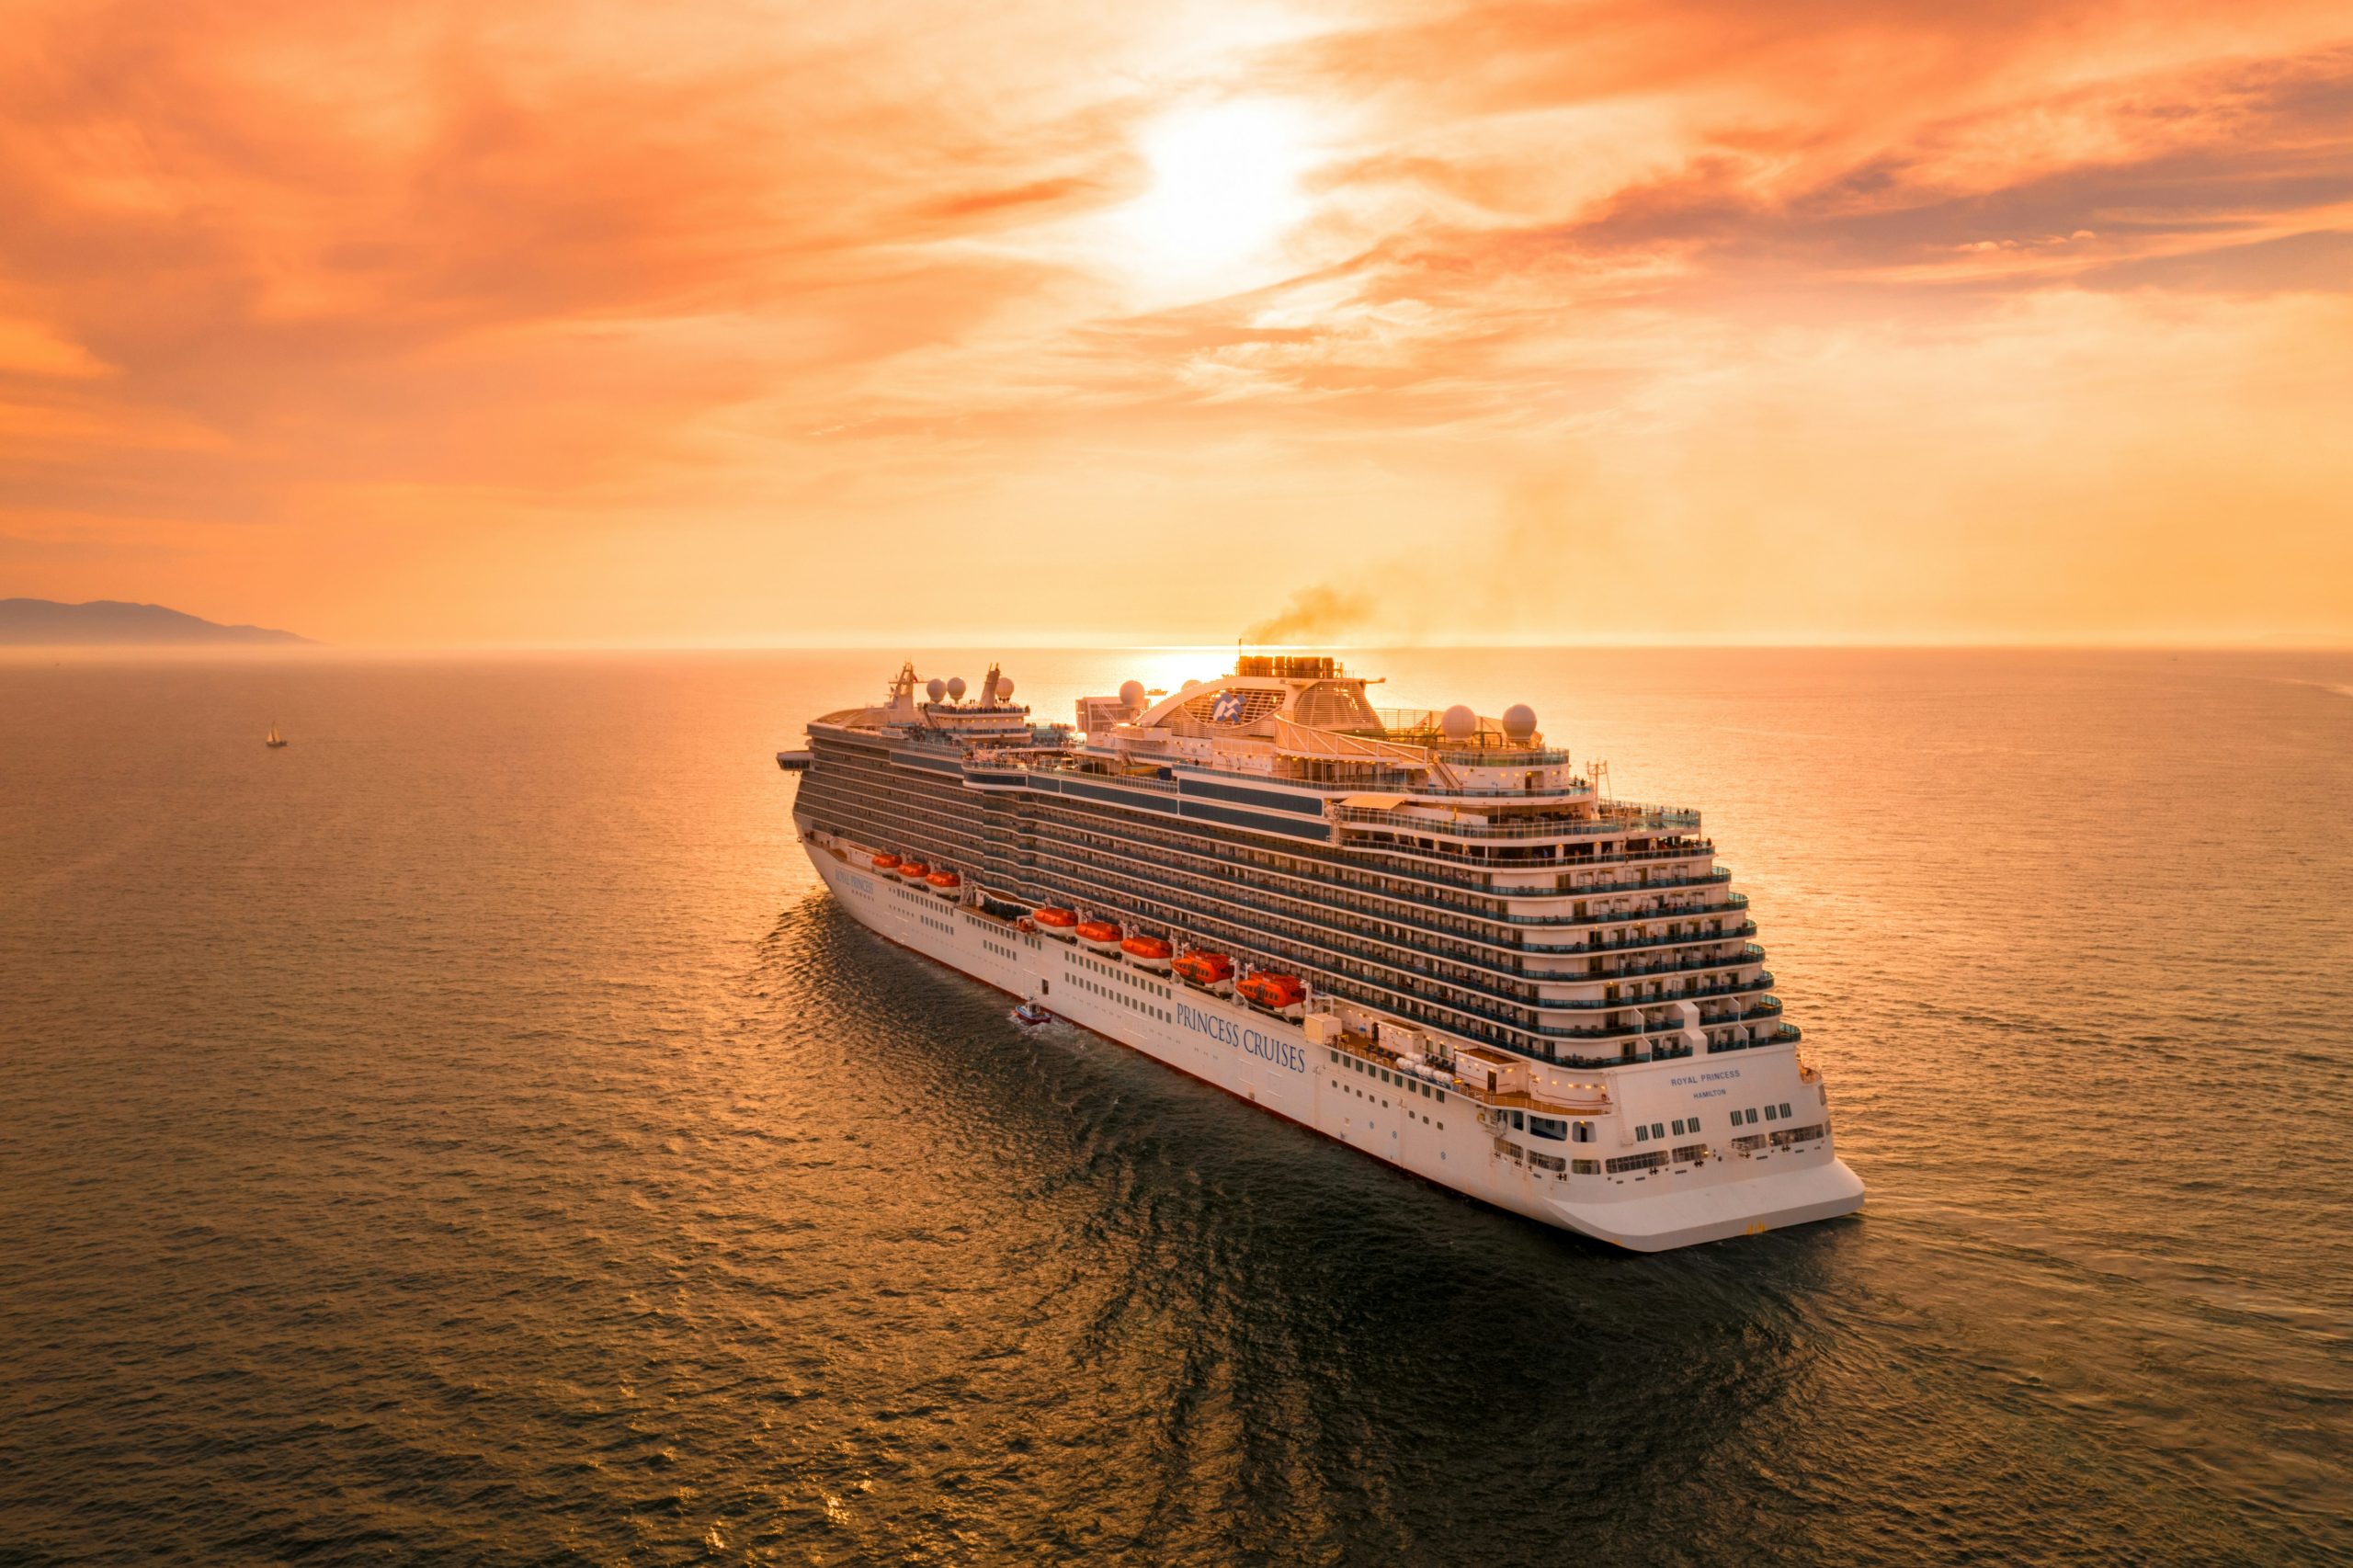 find the perfect cruise for your next vacation and experience the ultimate in relaxation, adventure, and luxury on the high seas.